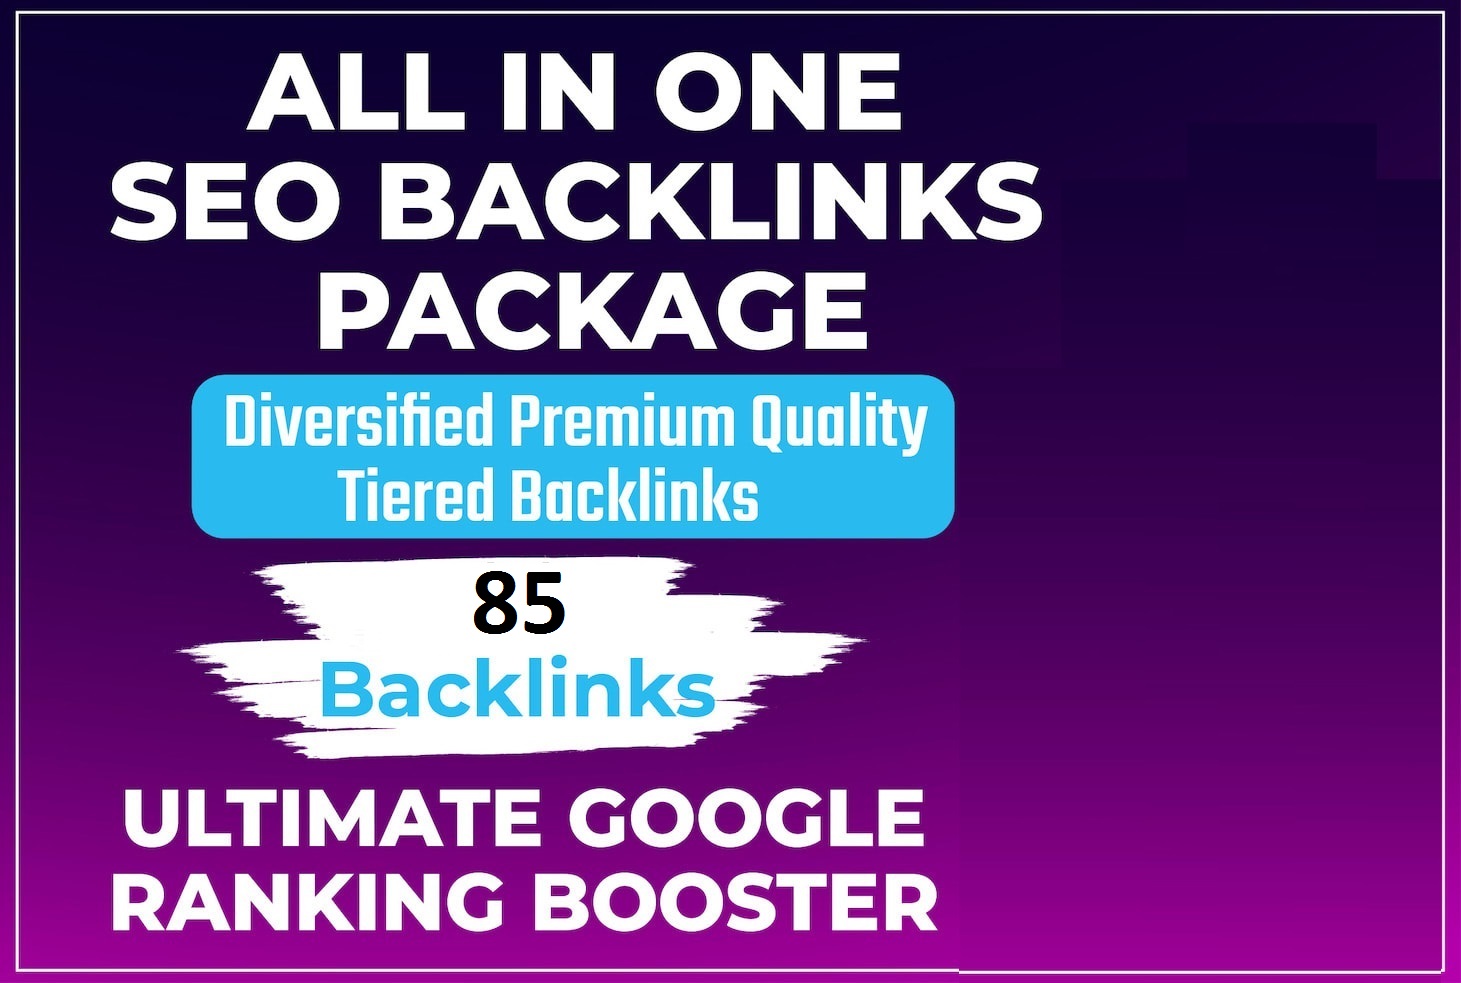 All IN One 85 UNIQUE PR-9 Safe SEO BackIinks on DA80+ sites to Boost Search Engine Results